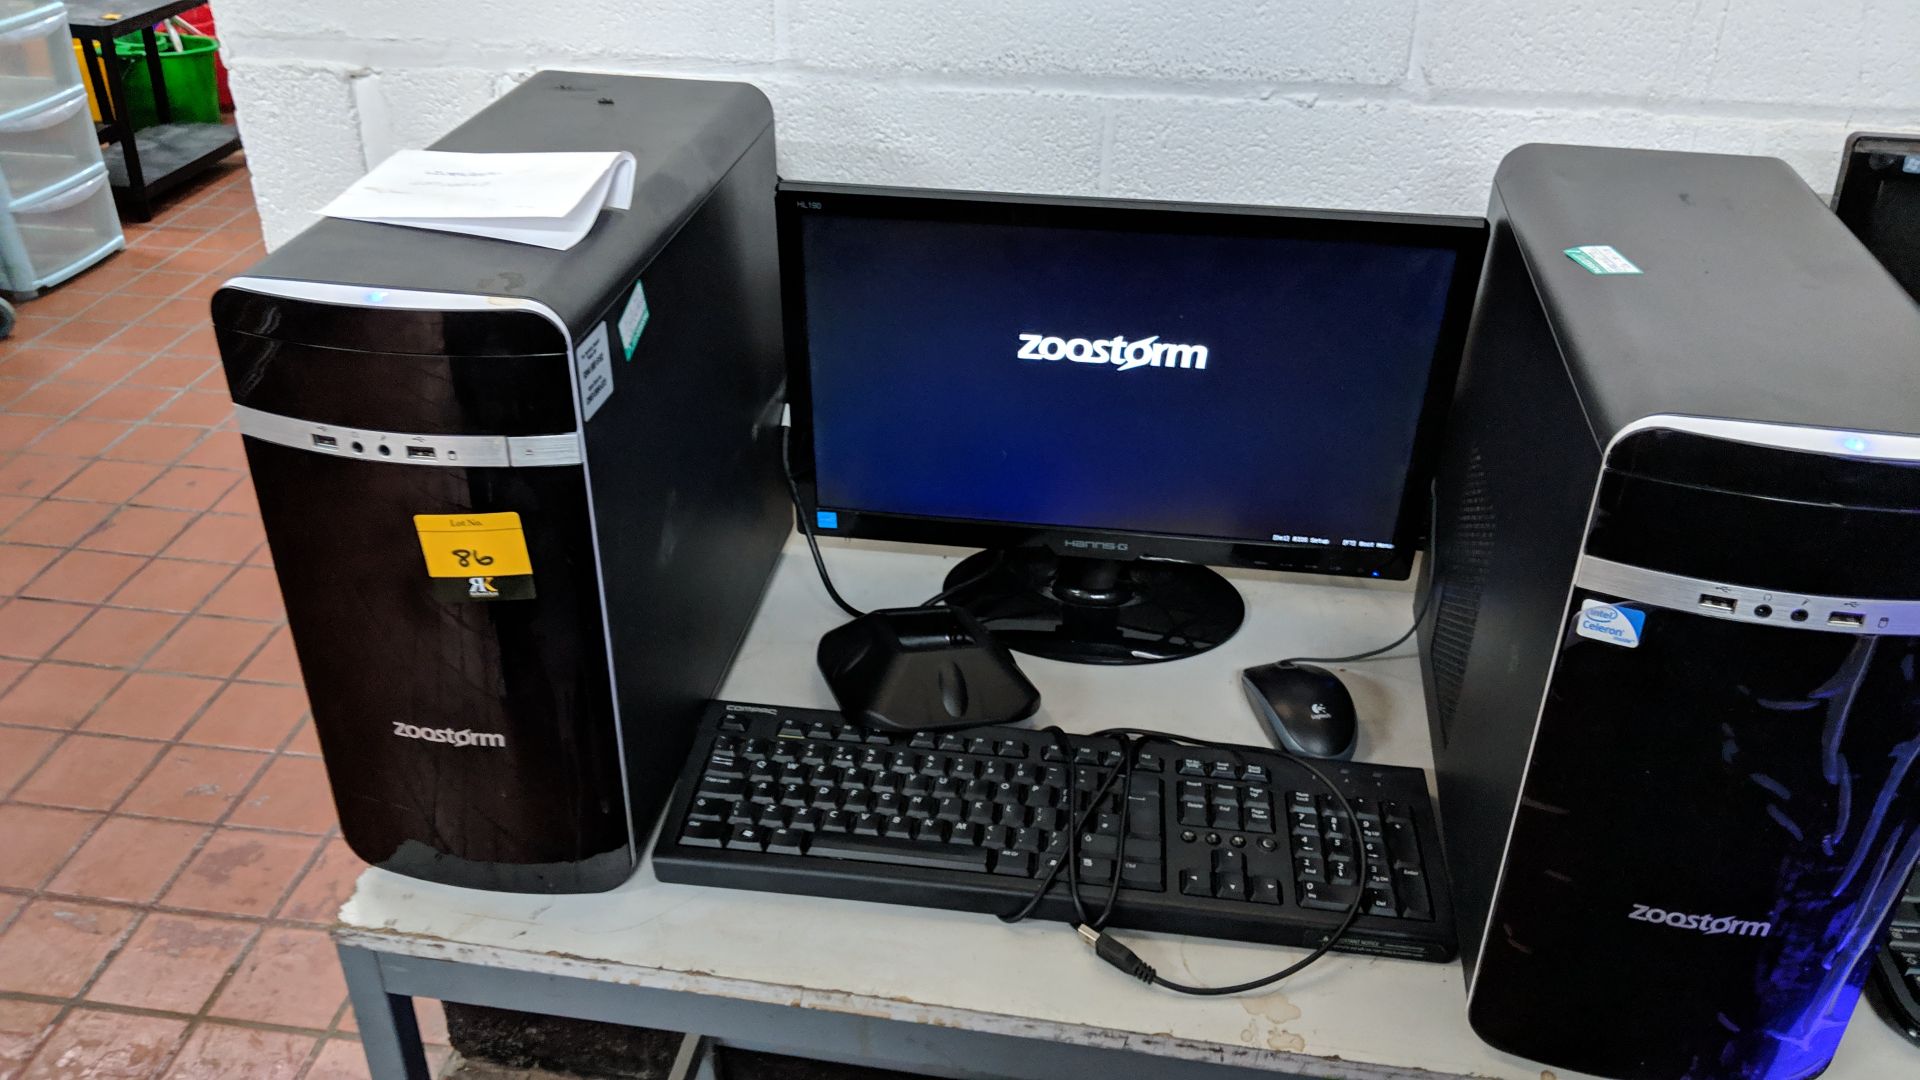 Pair of Zoostorm PCs each with monitor, keyboard & mouse Lots 80 - 95 & 168 - 249 consist of café - Image 9 of 9